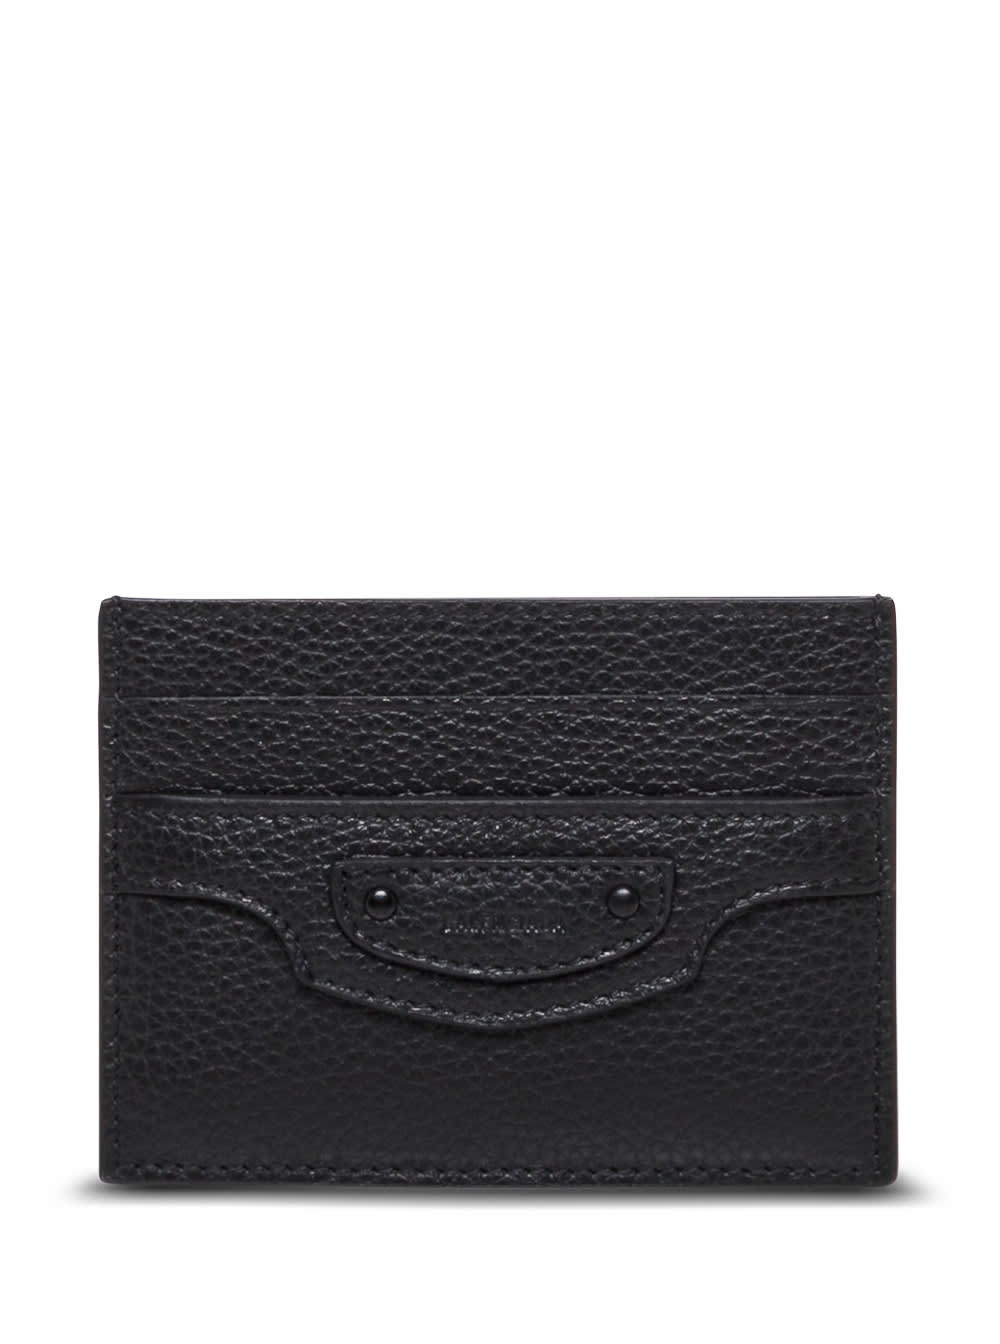 Balenciaga Grained Leather Cardholder With Logo